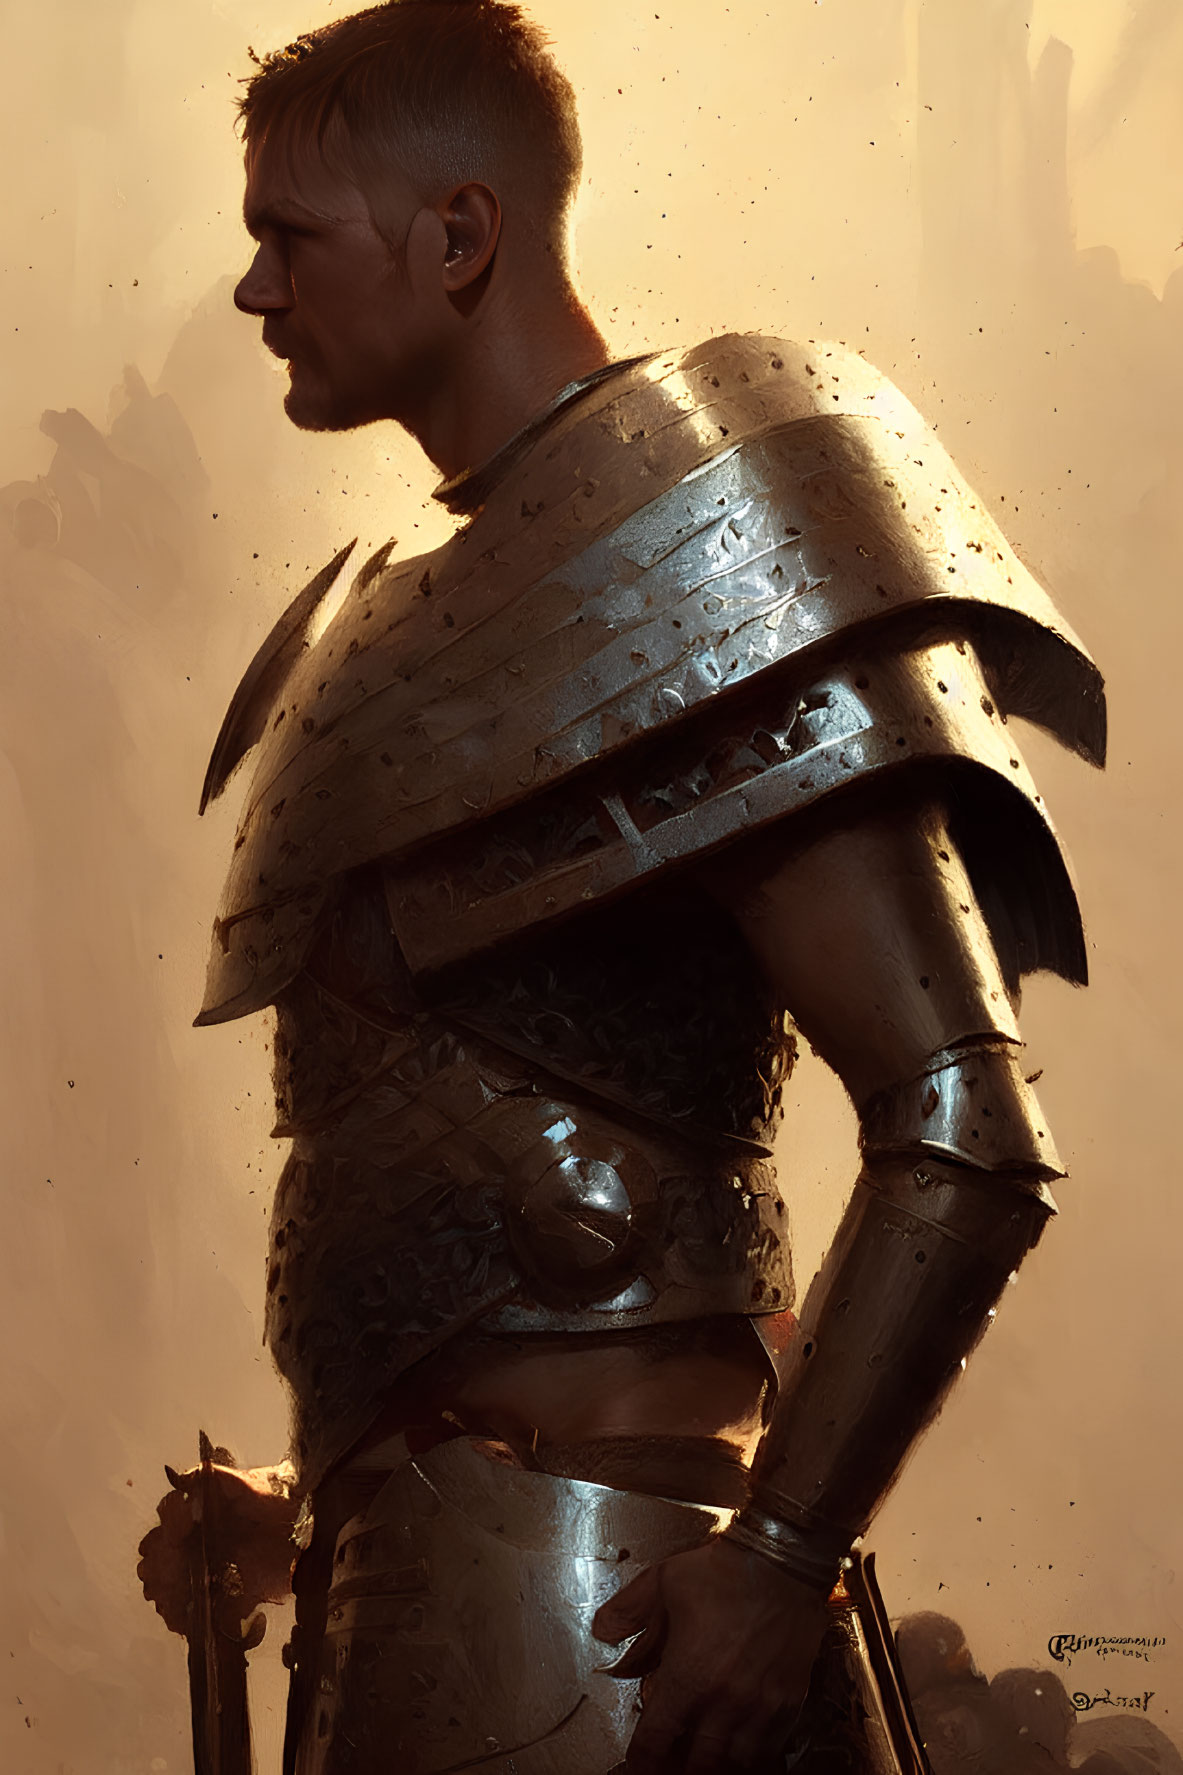 Profile of stern knight in detailed plate armor under warm light